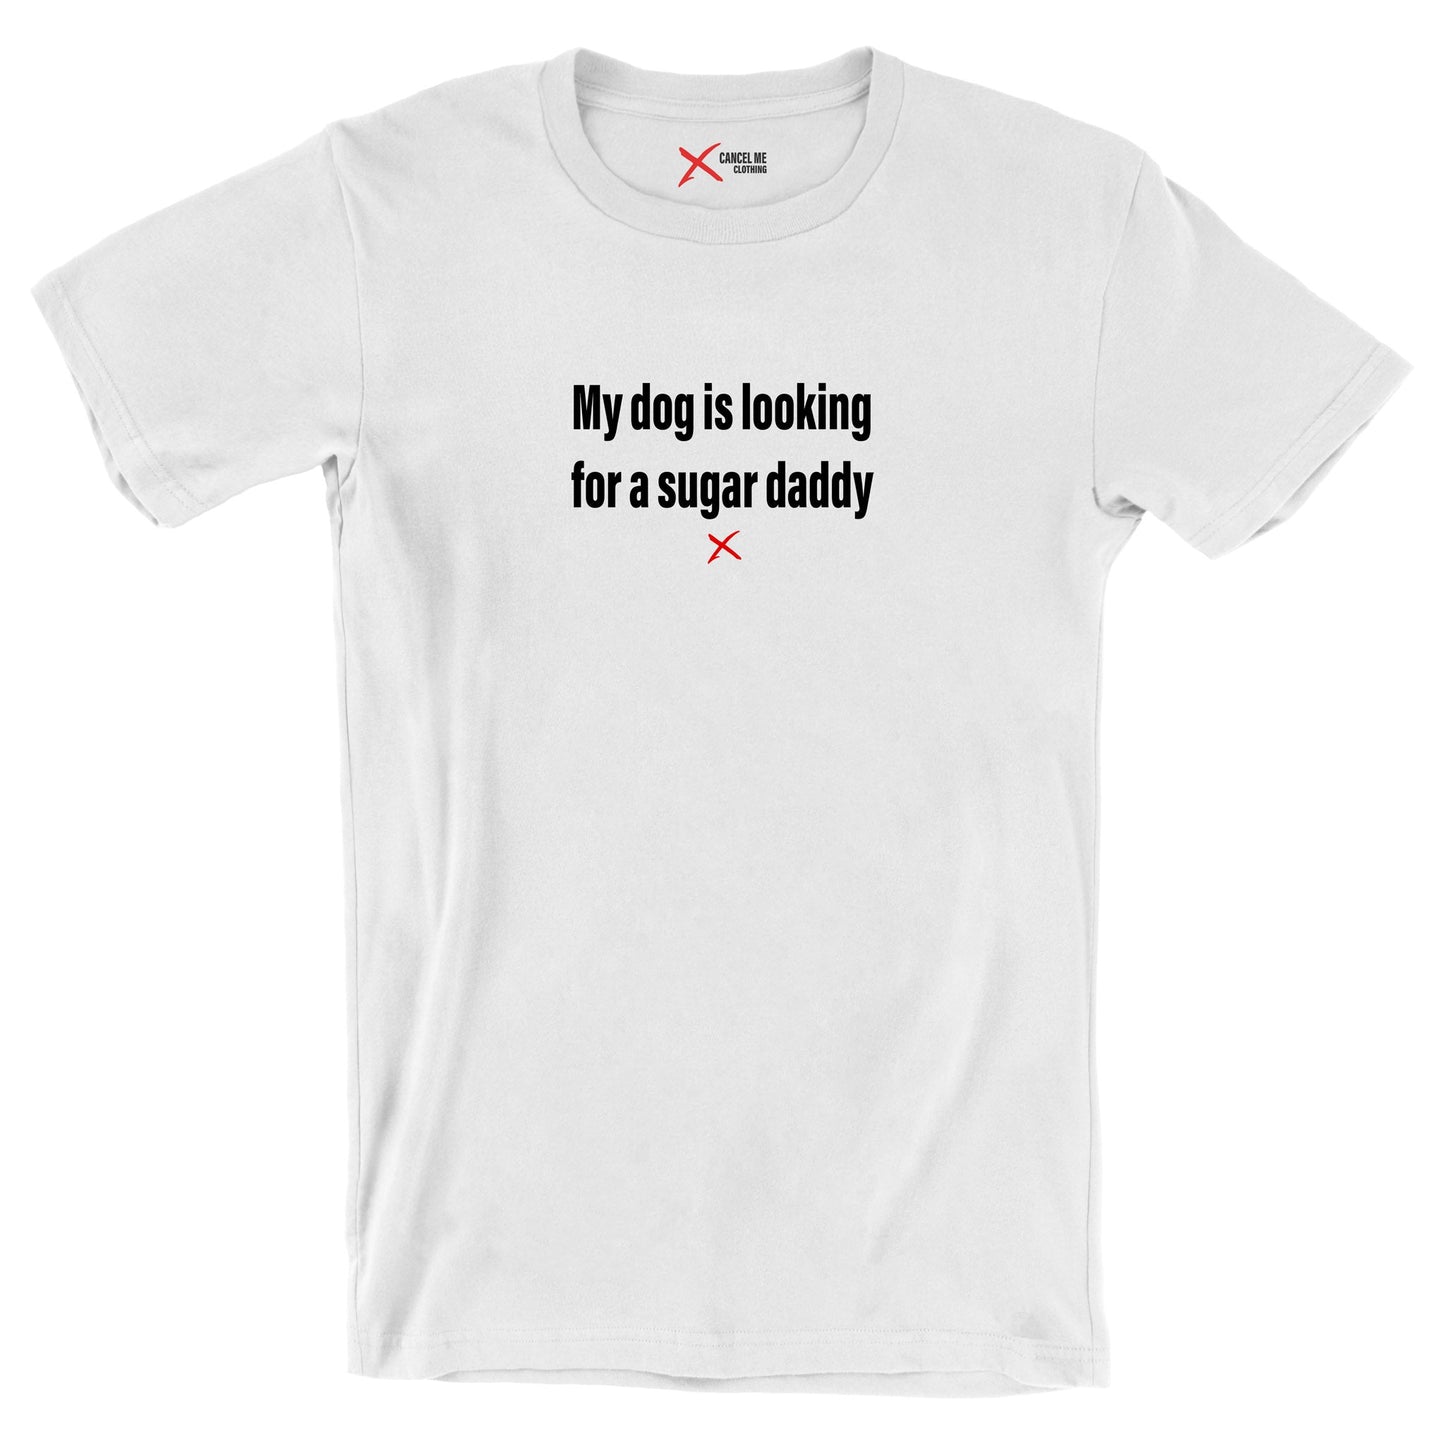 My dog is looking for a sugar daddy - Shirt